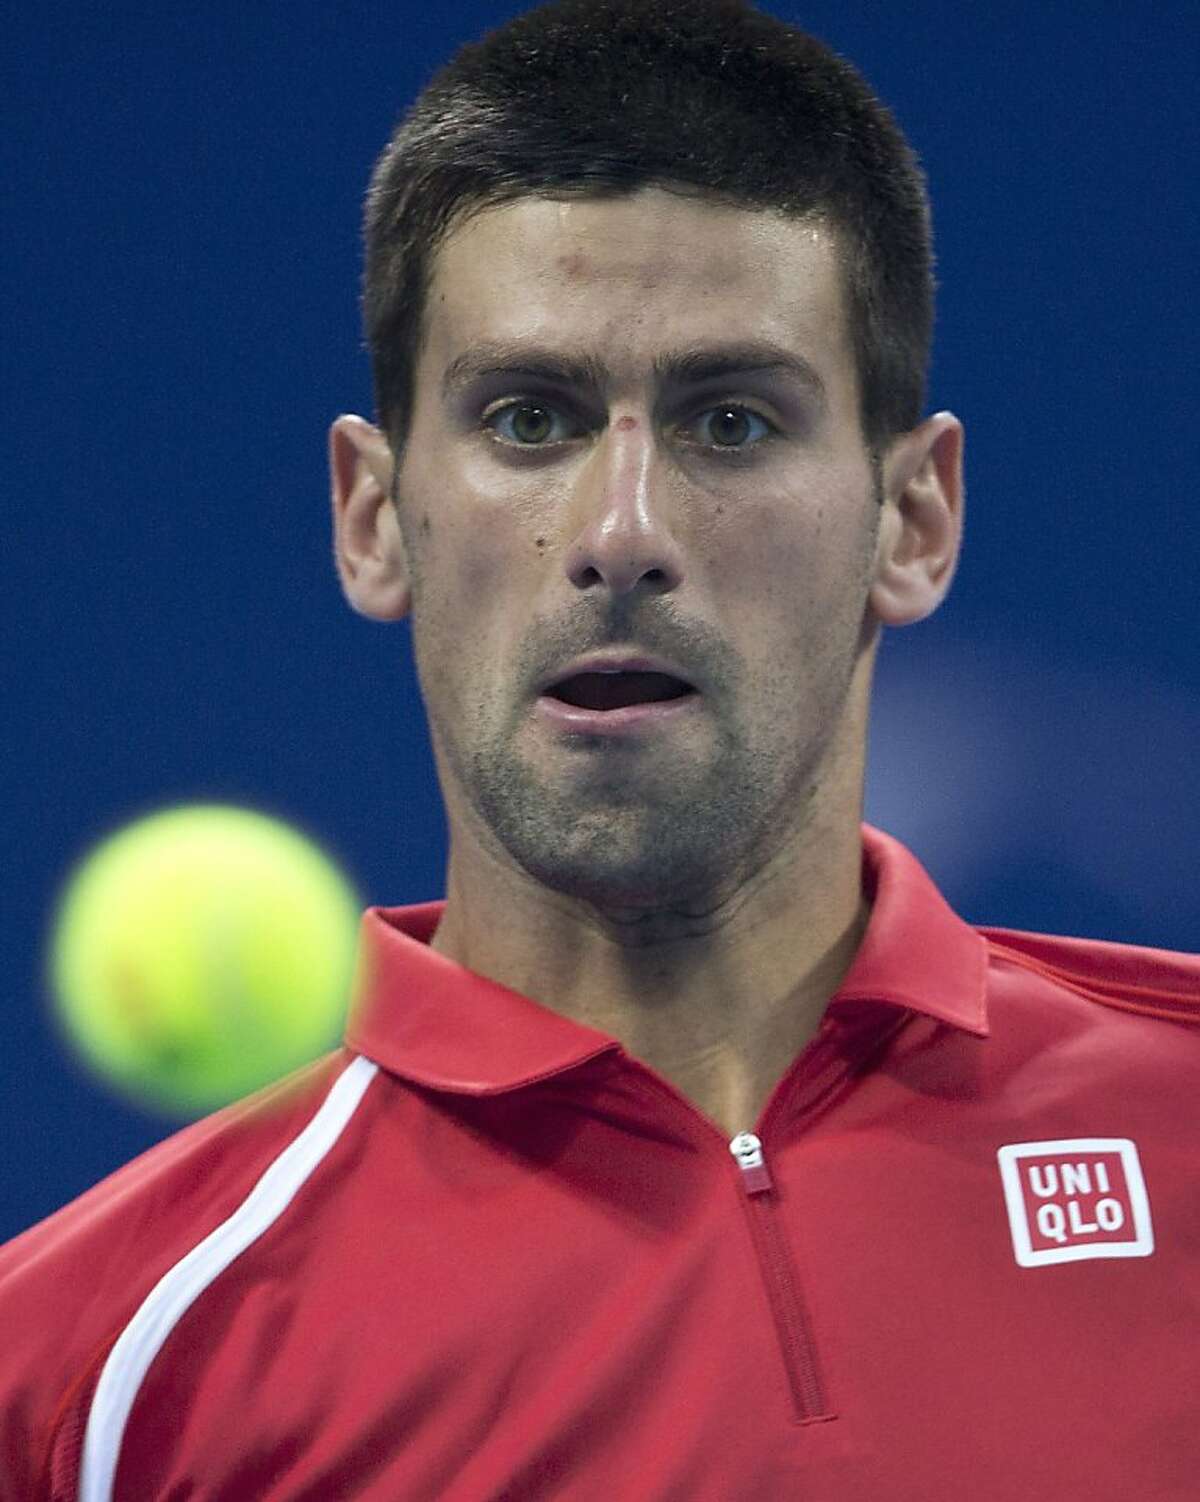 Serbia's Novak Djokovic stares looks at a ball while playing against Michael Berrer of Germany in their men's singles match of the China Open tennis tournament in Beijing Tuesday, Oct. 2, 2012. Djokovic defeated Berrer 6-1, 6-7, 6-2. (AP Photo/Andy Wong)